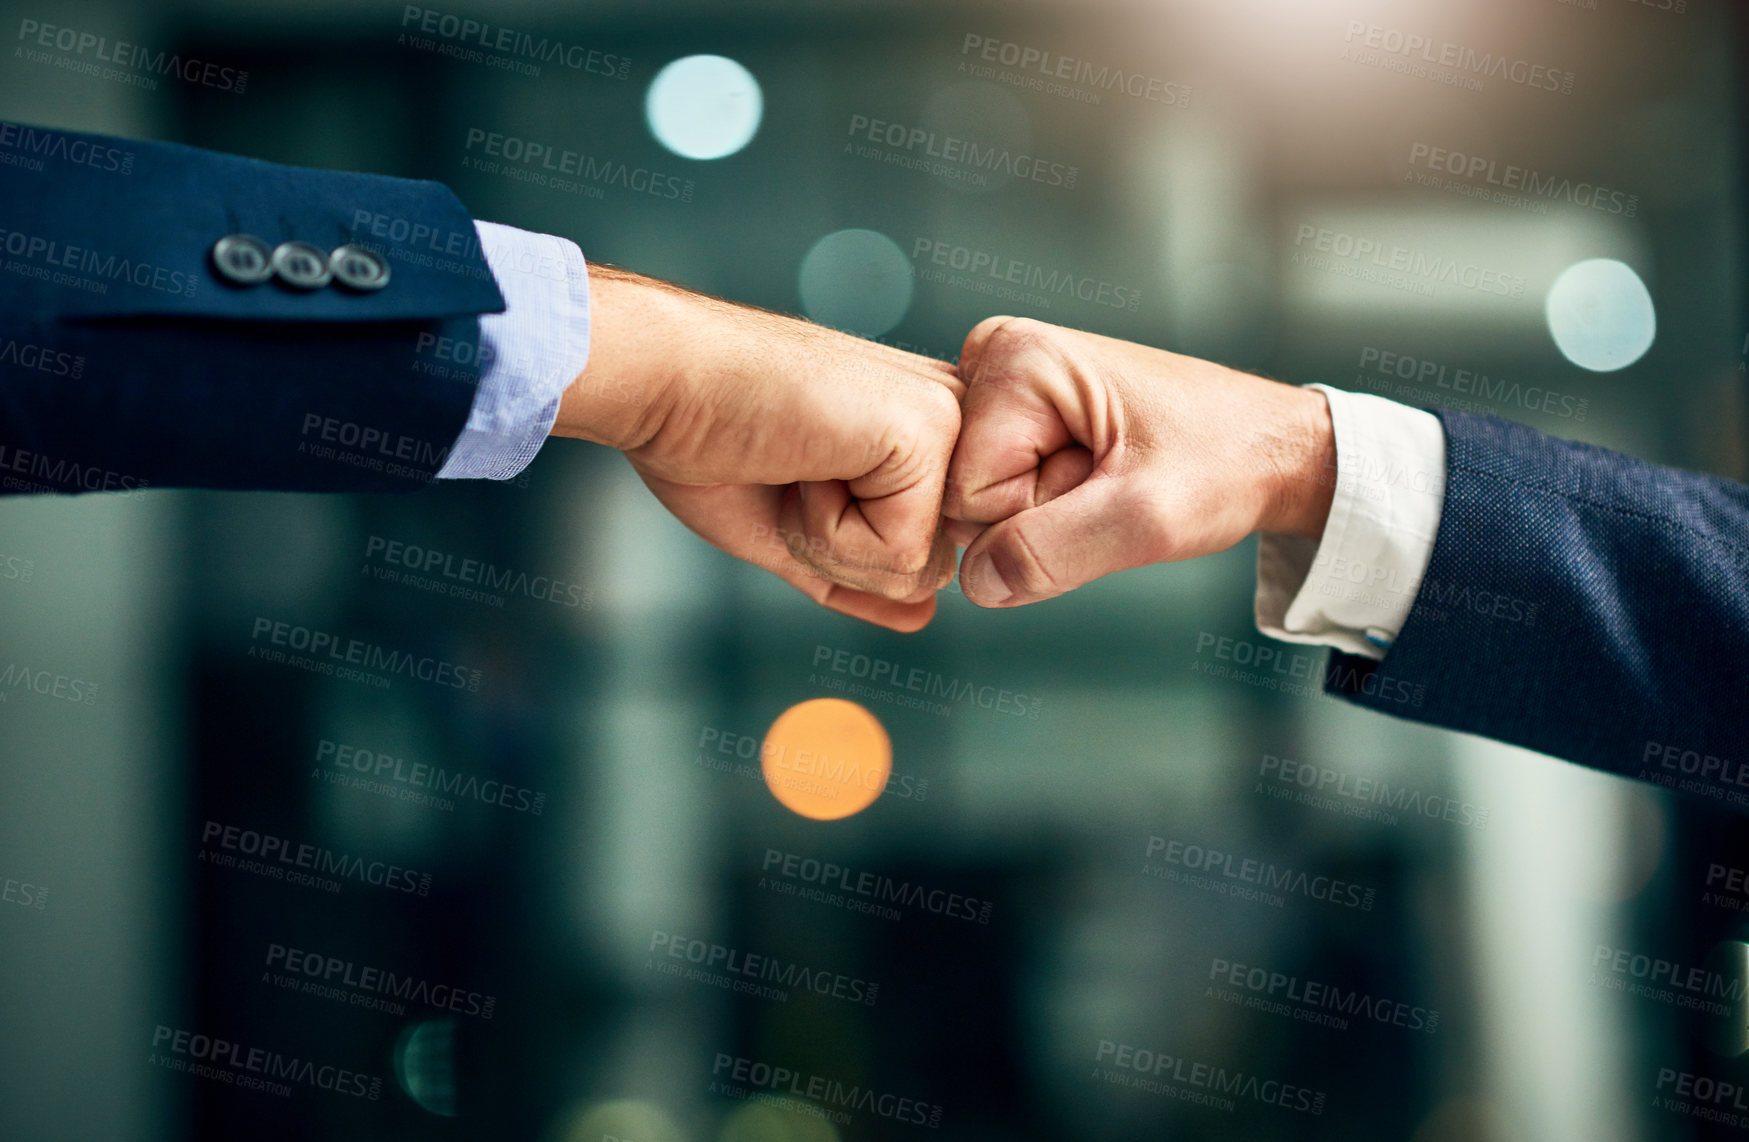 Buy stock photo Partnership, teamwork and unity by hands fist bumping in support of a mission or goal. Business partners collaborating on a vision, community planning a strategy to support and succeed together